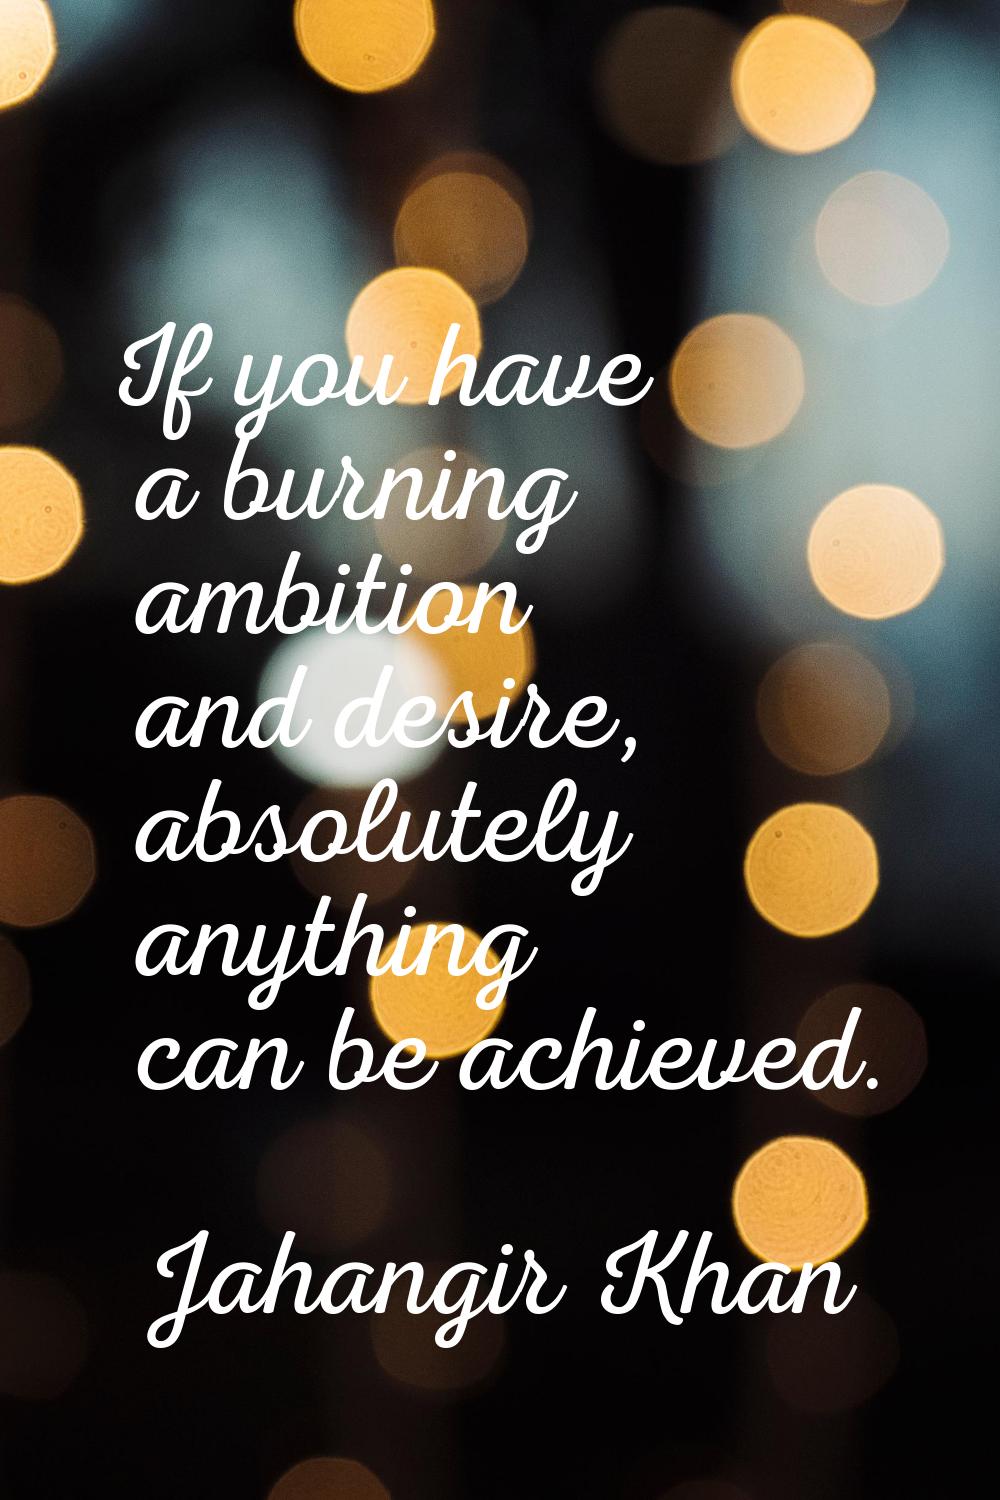 If you have a burning ambition and desire, absolutely anything can be achieved.